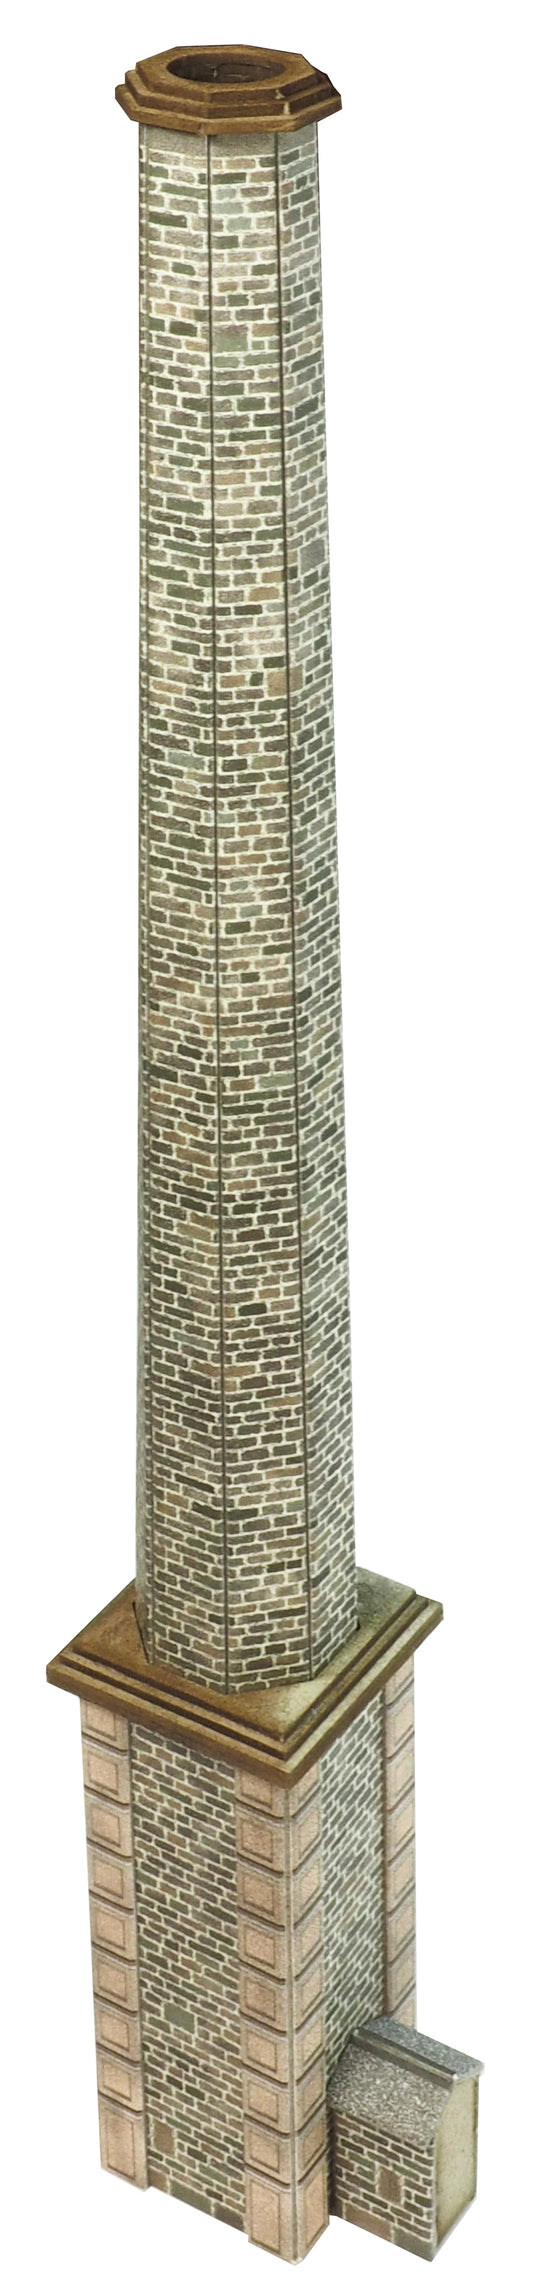 Metcalfe PO401 - Old Mill Chimney Stack